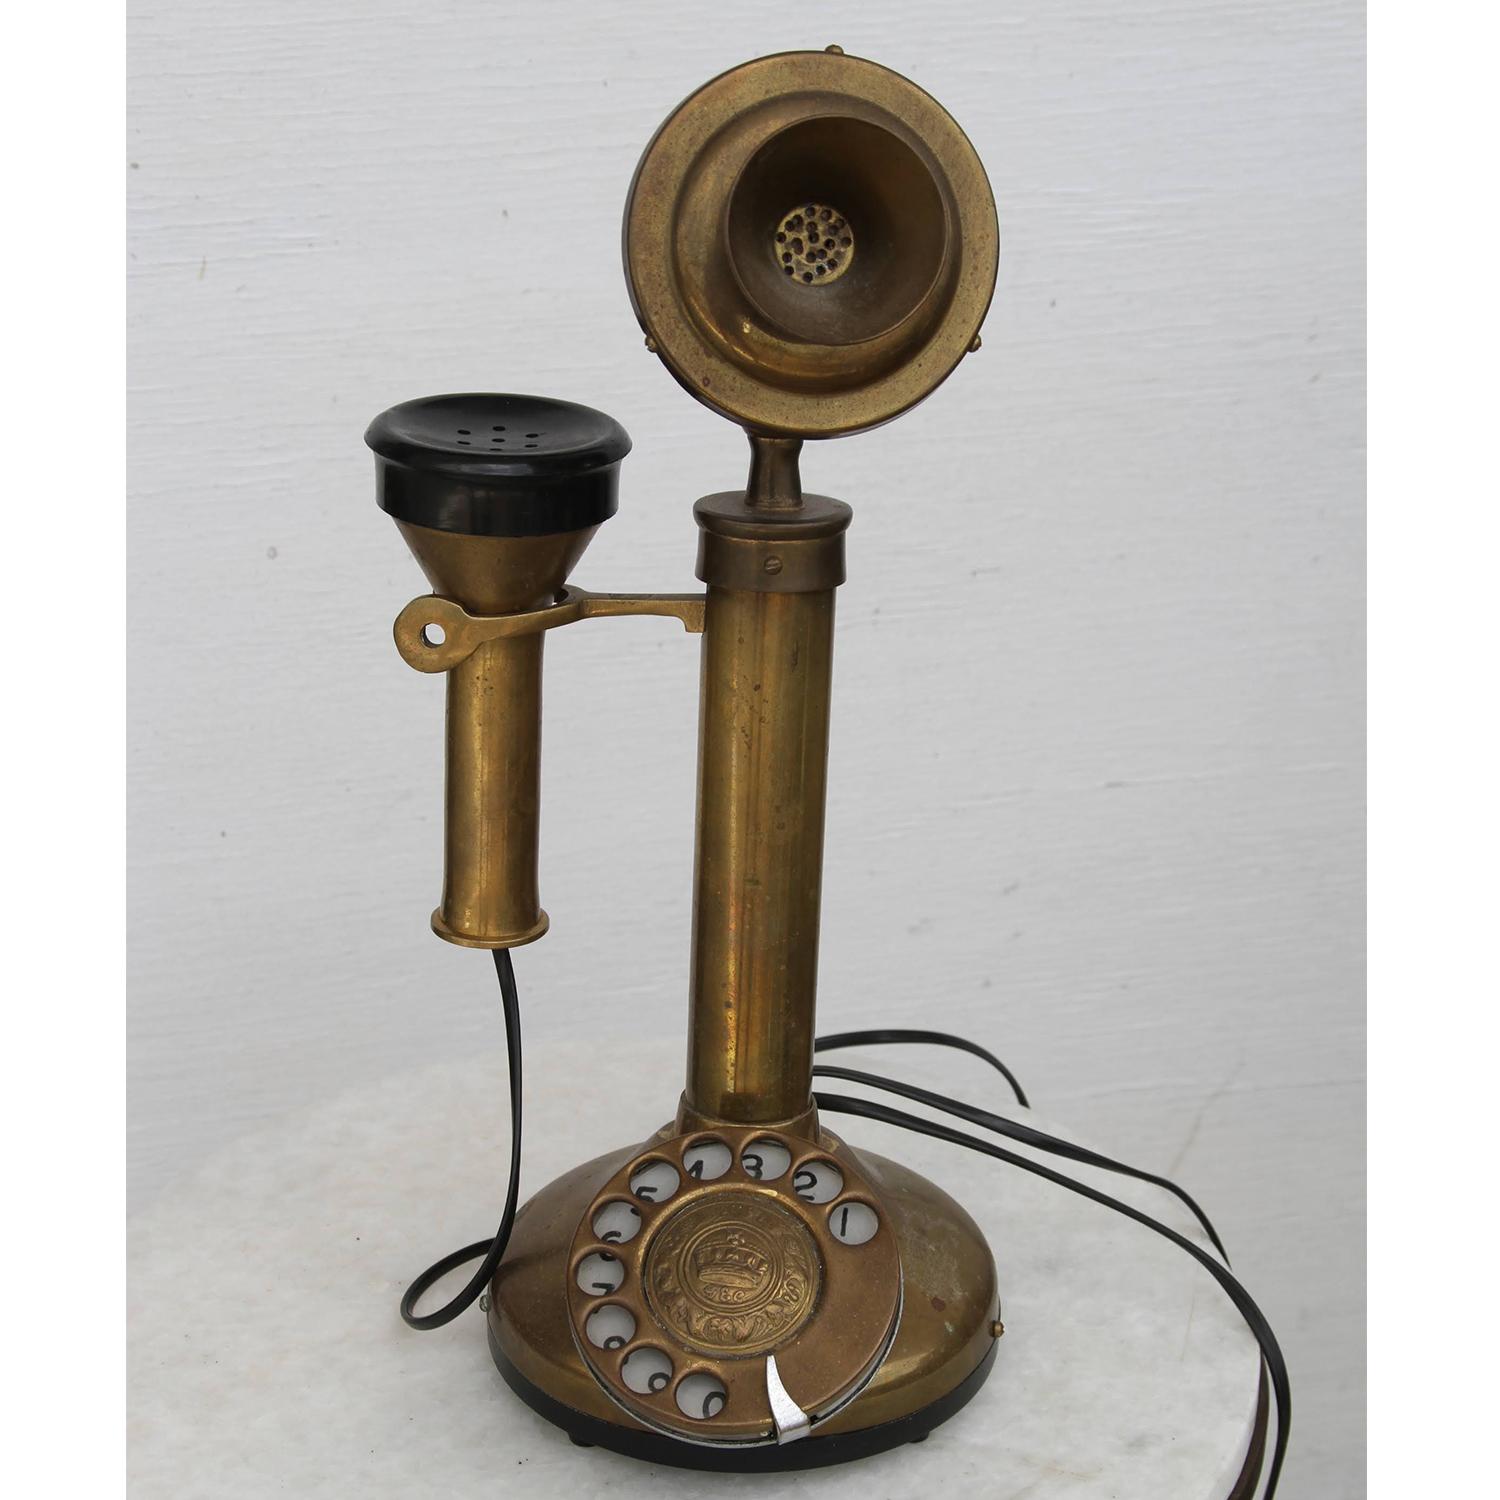 Antique brass telephone


 Candlestick telephone with rotary dial and desk stand in brass.
Nicely aged with light marks. Wired.
This type of telephone was popular from 1900 to the 1950s. These telephones are also referred to as pedestal